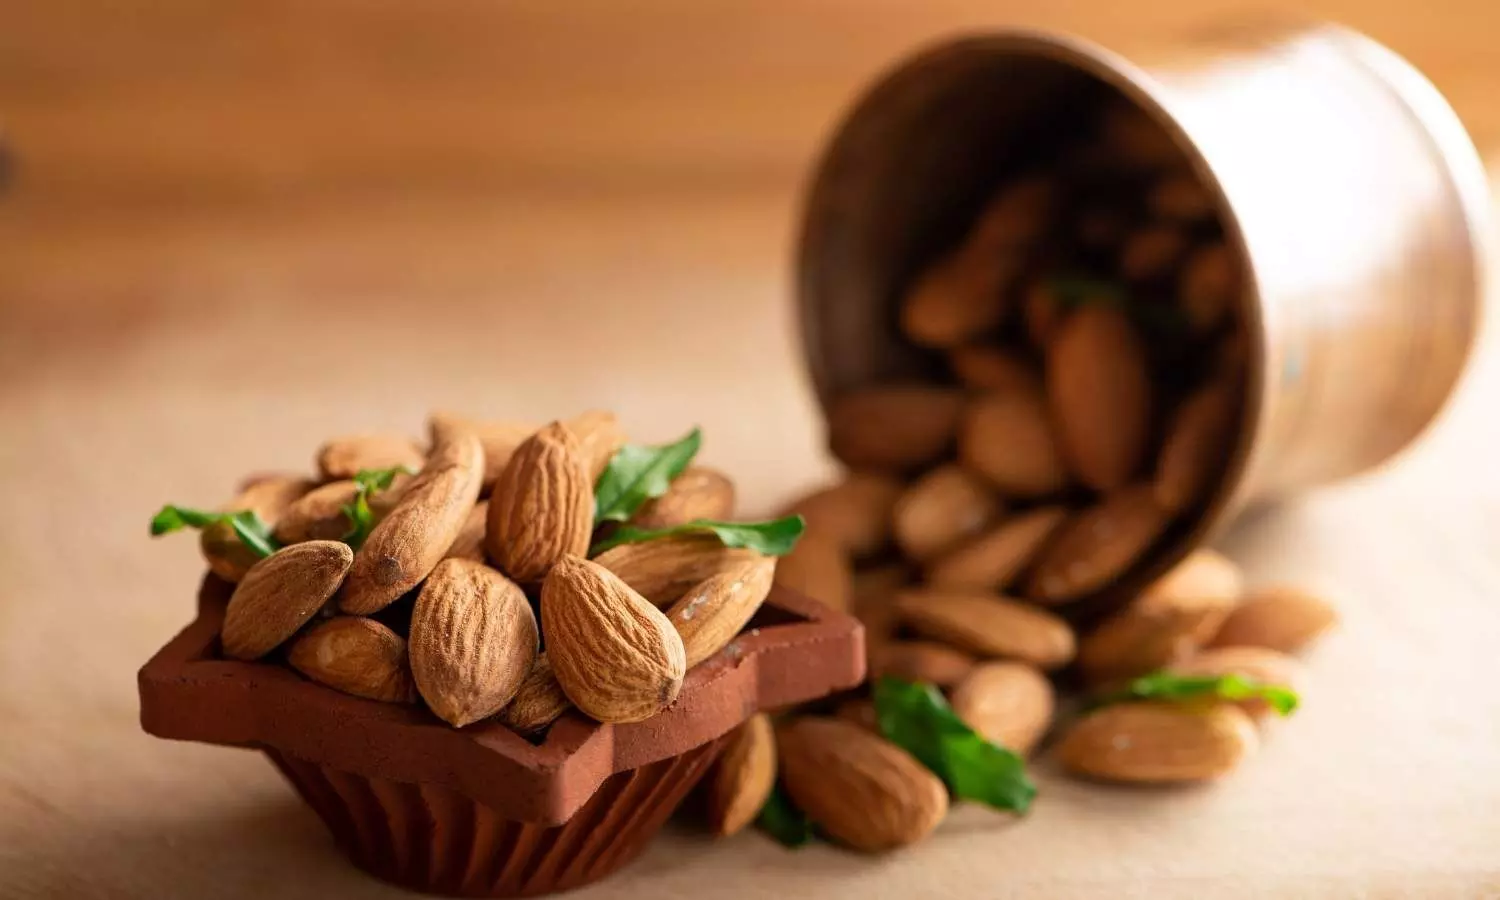 Eating a handful of almonds a day boosts gut health